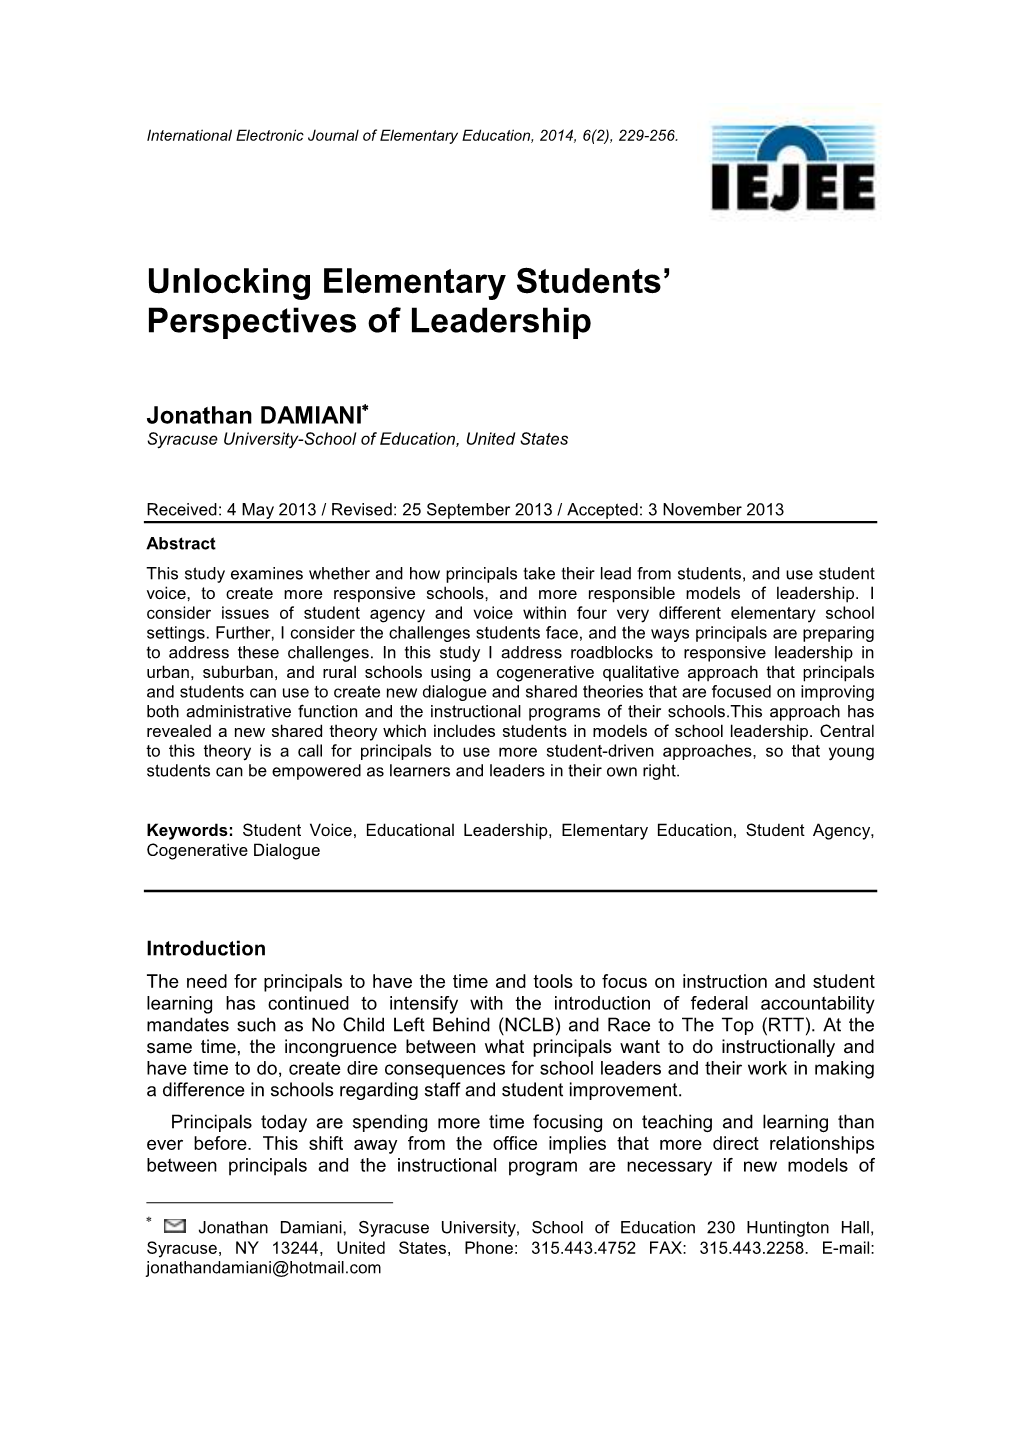 Unlocking Elementary Students' Perspectives of Leadership